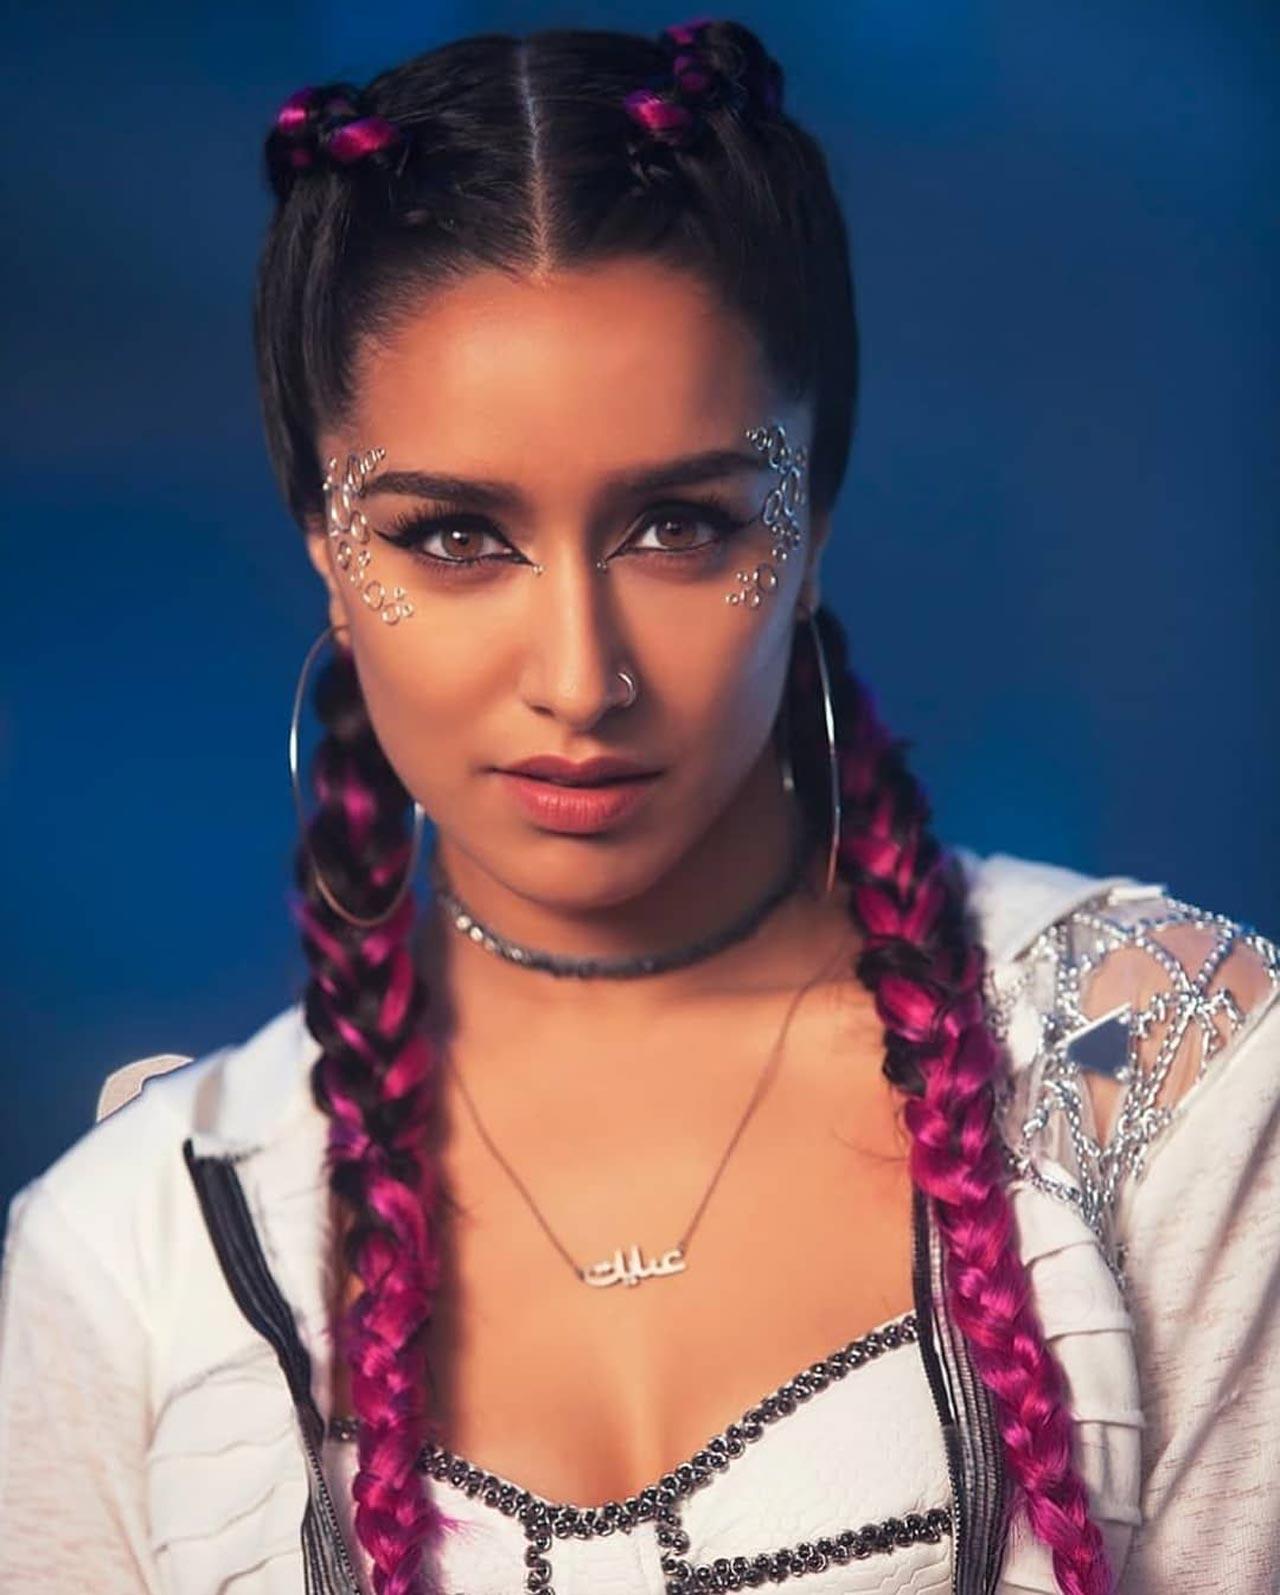 Shraddha Kapoor has always been very particular about her looks each time she steps out. In this picture, her eye makeup and fluorescent pink braid look from Street Dancer 3 totally gave us a sexy street style look to die for! 